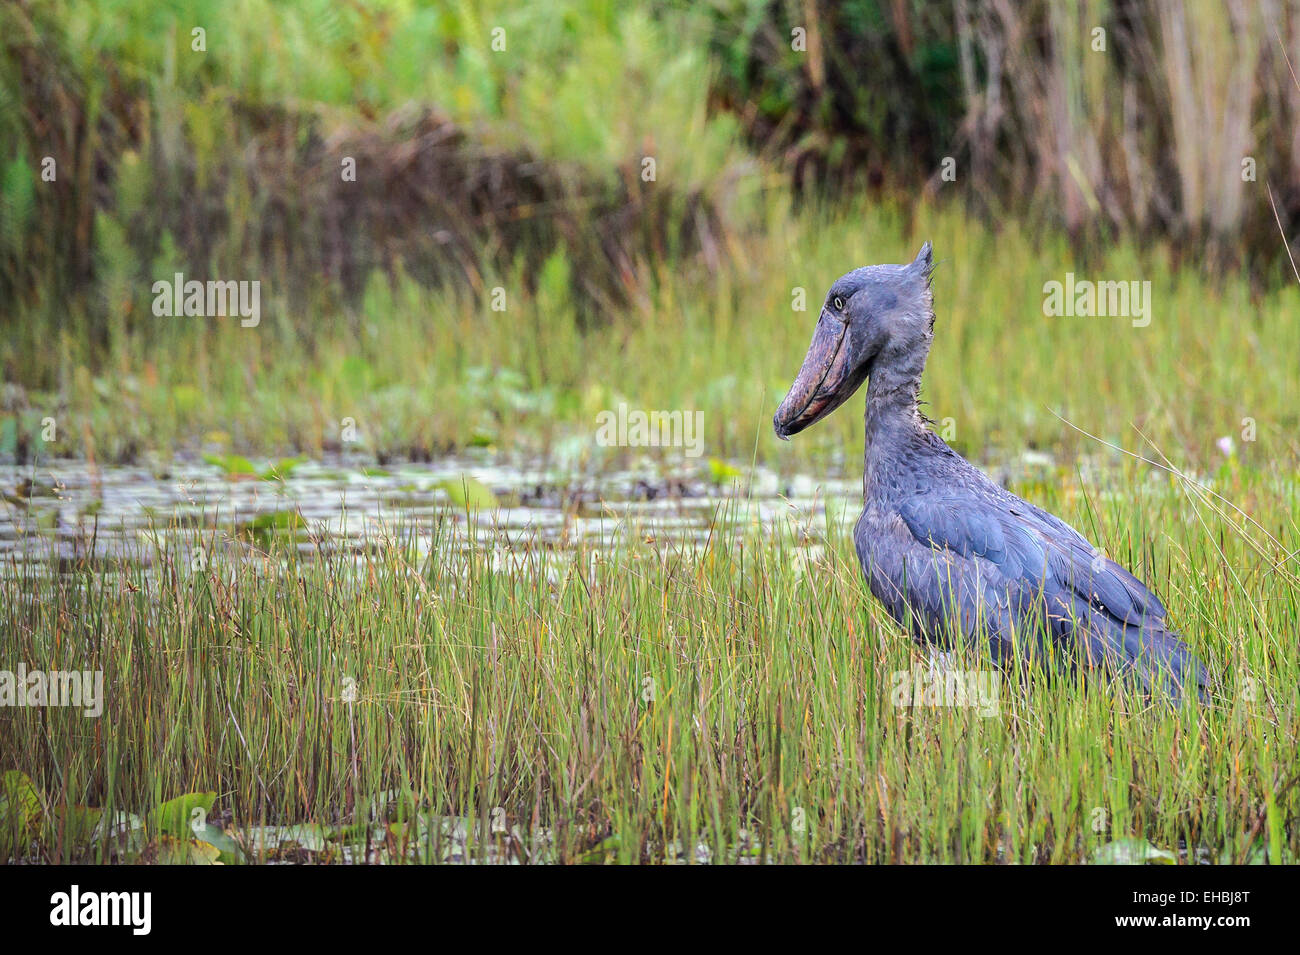 a shoebill, whalehead or shoe-billed stork stood absolutely still in Mabamba Swamp, Uganda. Horizontal format with copyspace. Stock Photo